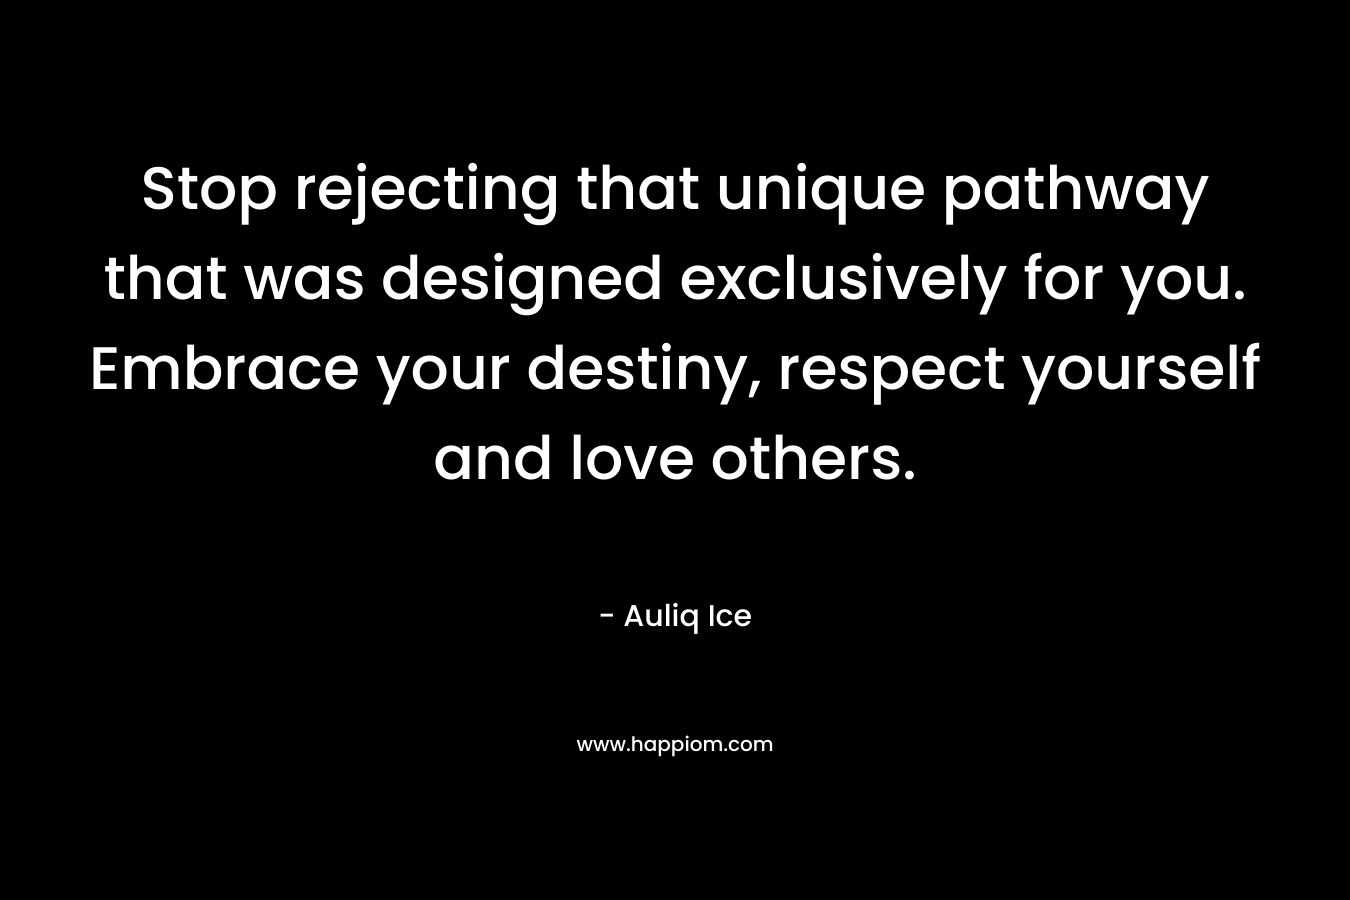 Stop rejecting that unique pathway that was designed exclusively for you. Embrace your destiny, respect yourself and love others.